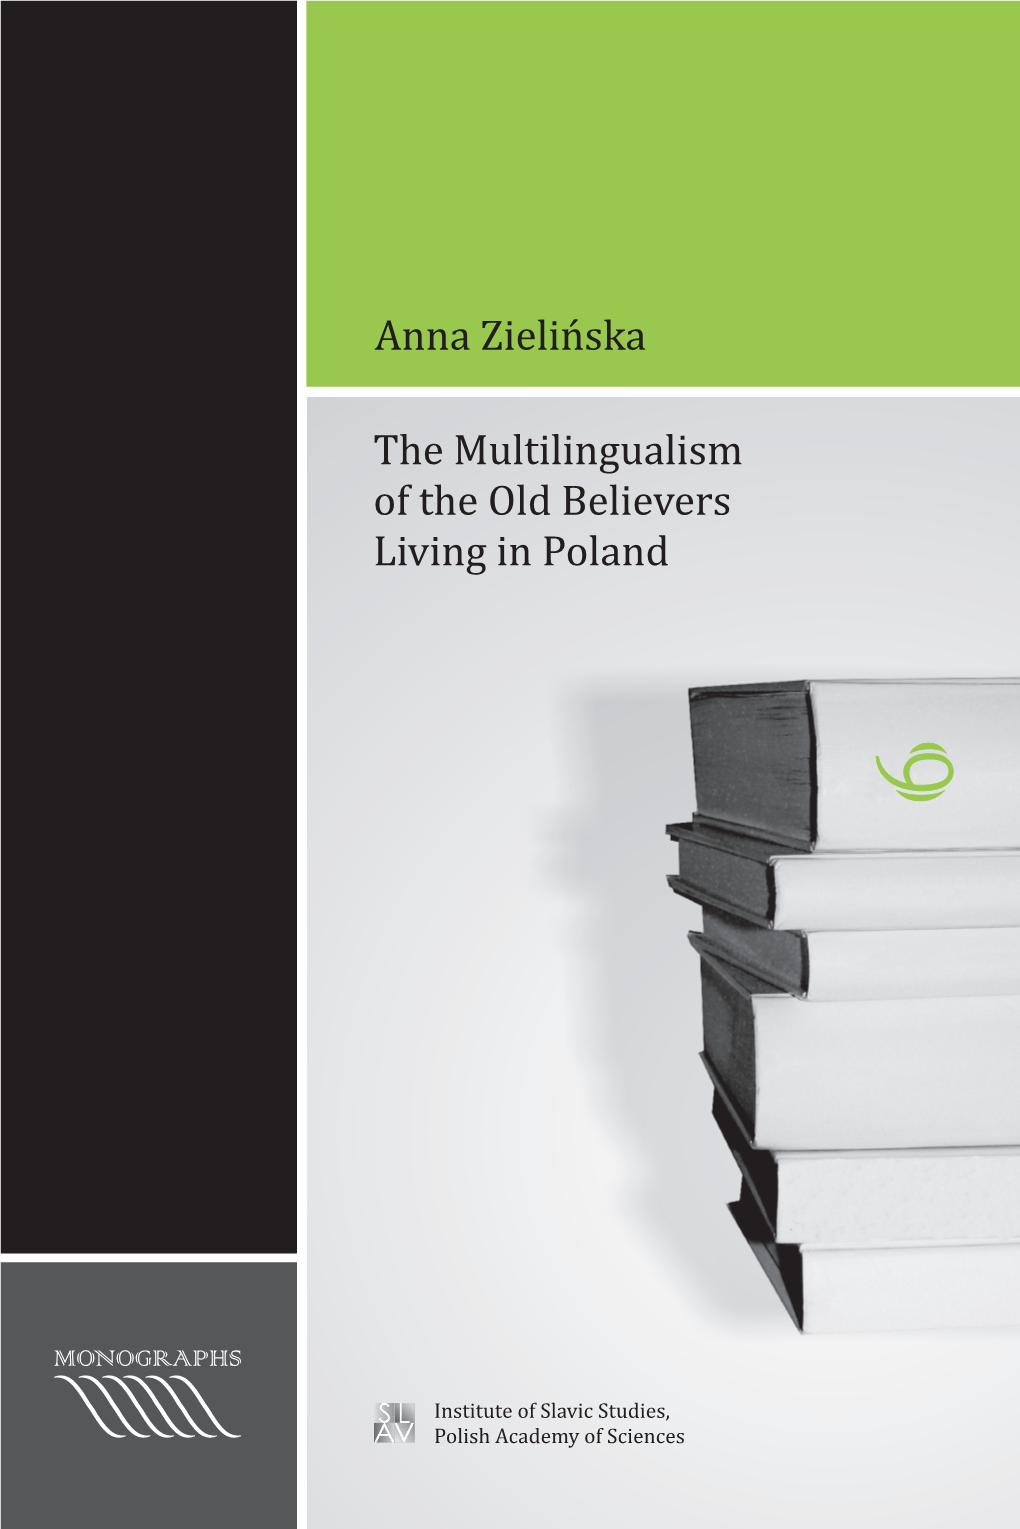 The Multilingualism of the Old Believers Living in Poland the Multilingualism of the Old Believers Living in Poland Anna Zieliñska